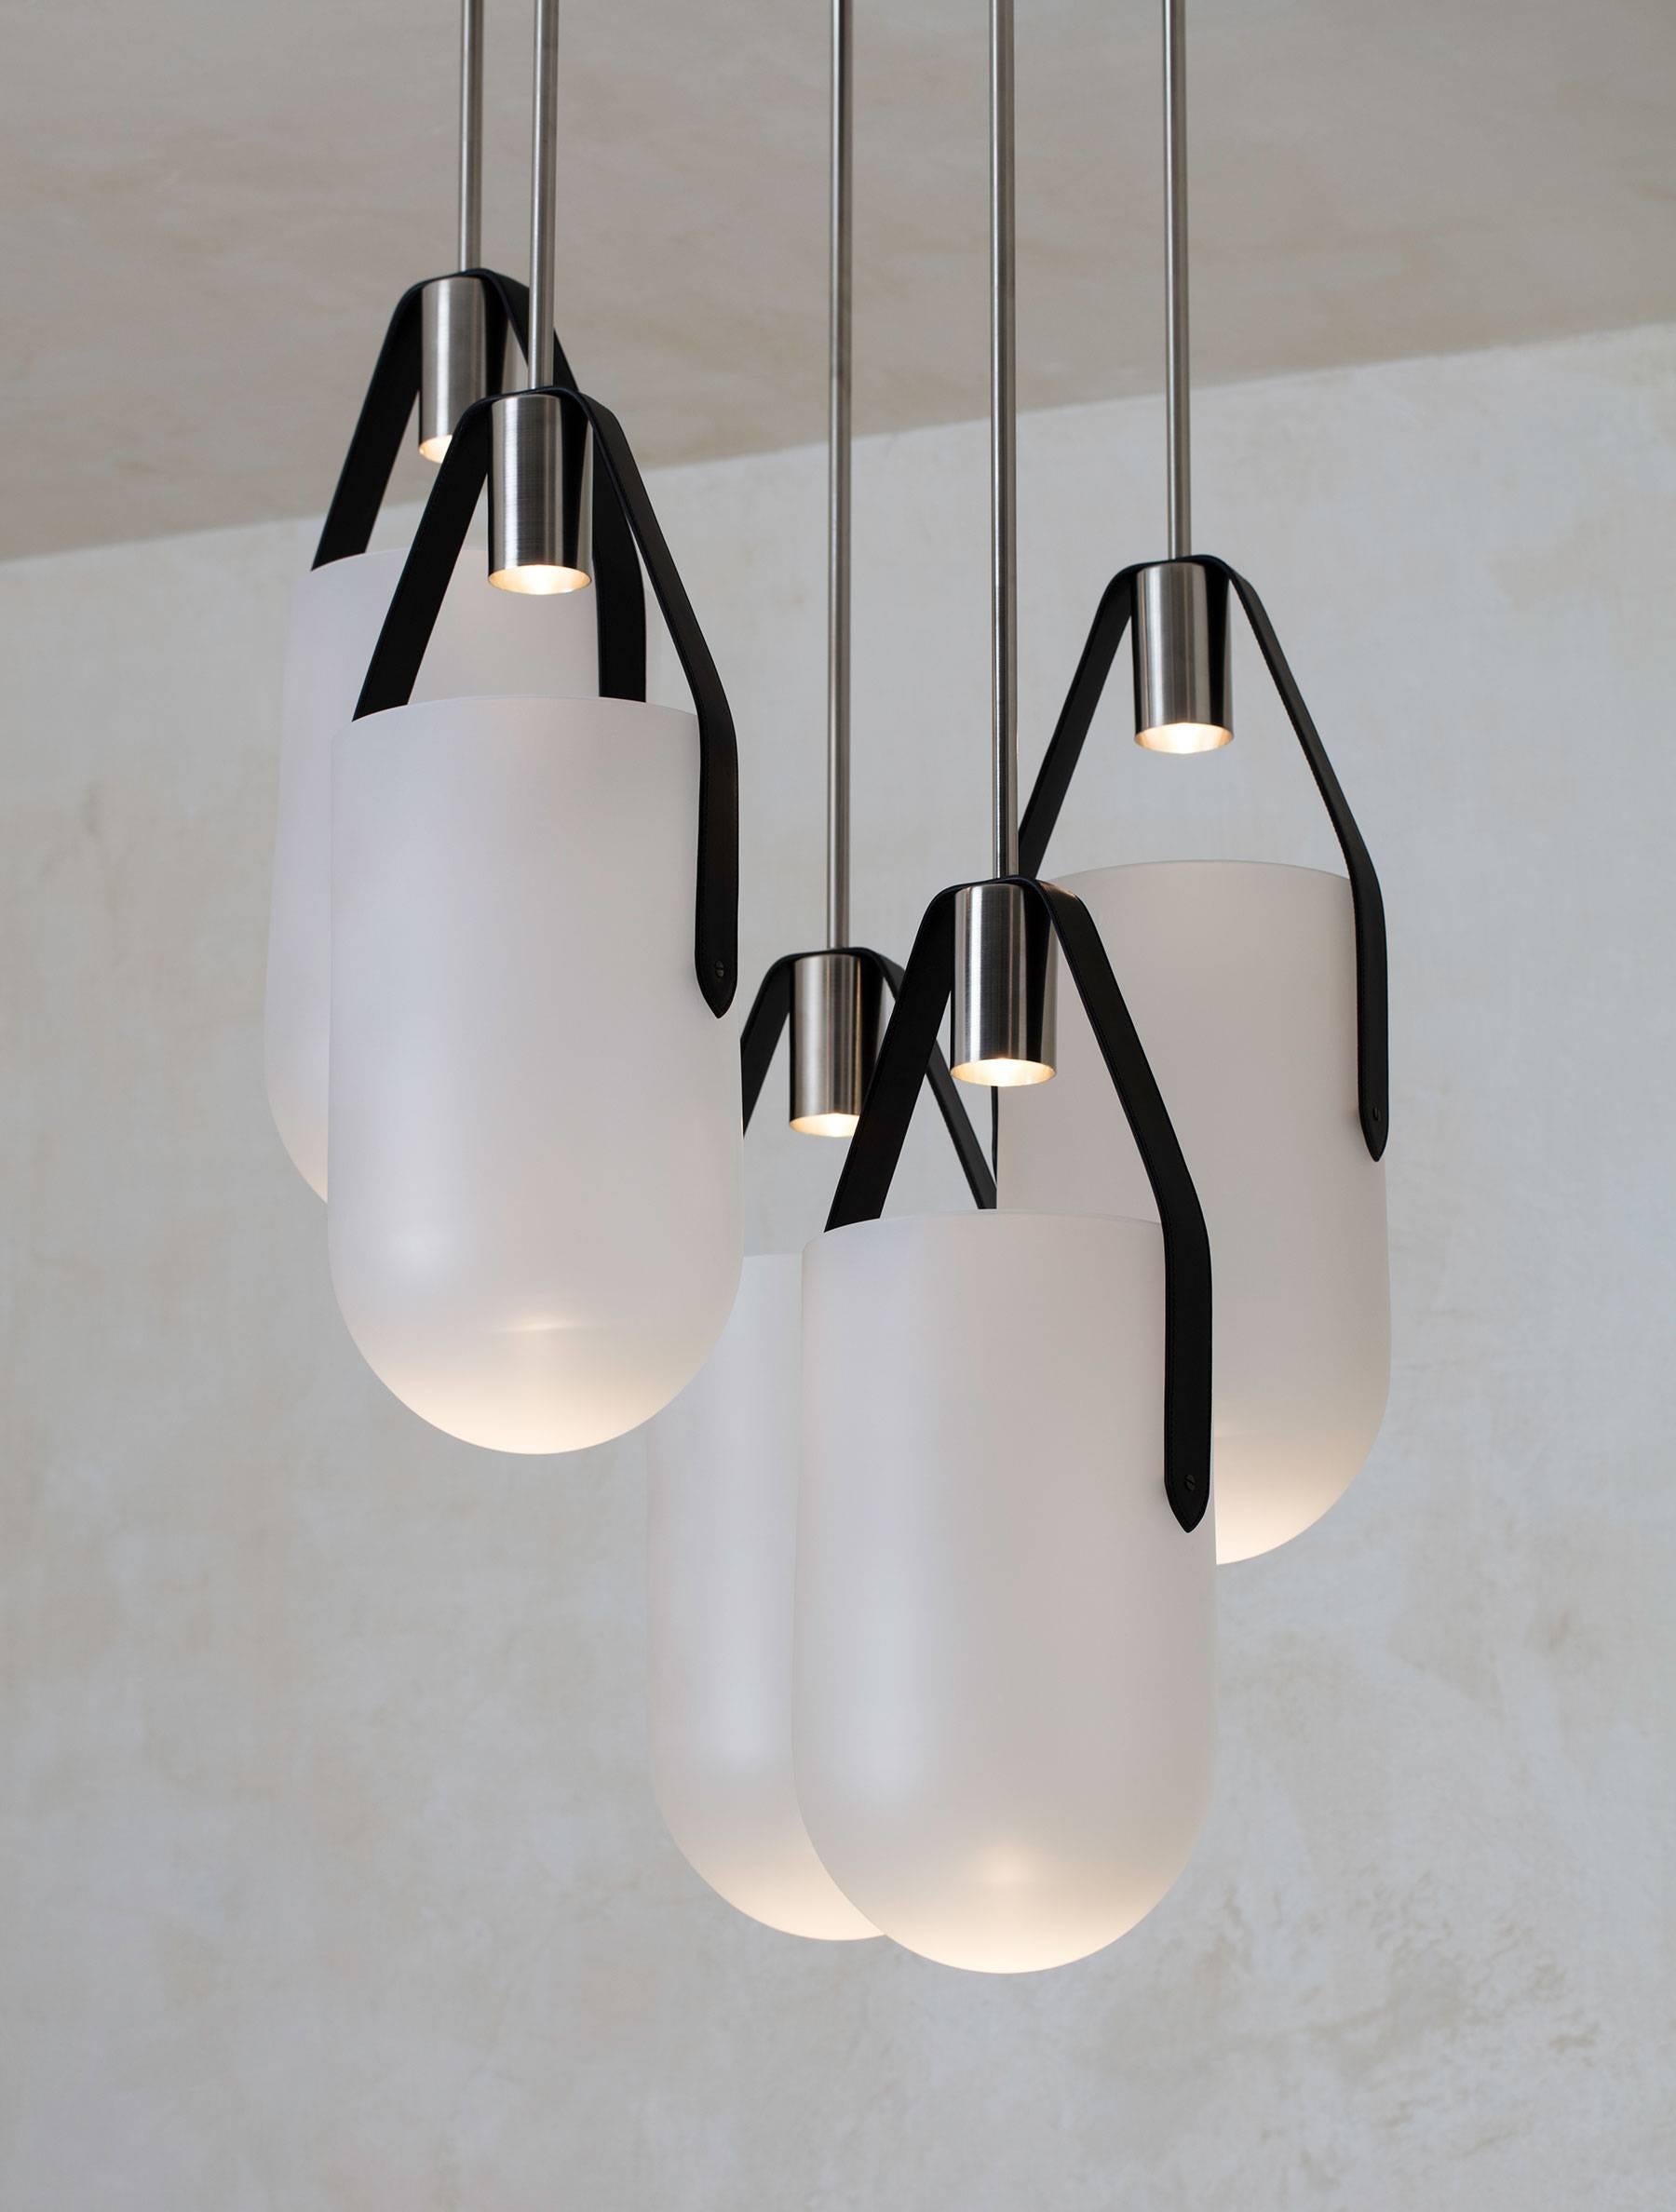 5 pendants are clustered together in an arrangement of Allied Maker’s well pendants. Each pendant features a narrow beam of light that is projected into a hand-blown Glass bell suspended by leather straps and brass hardware. The fixture creates a